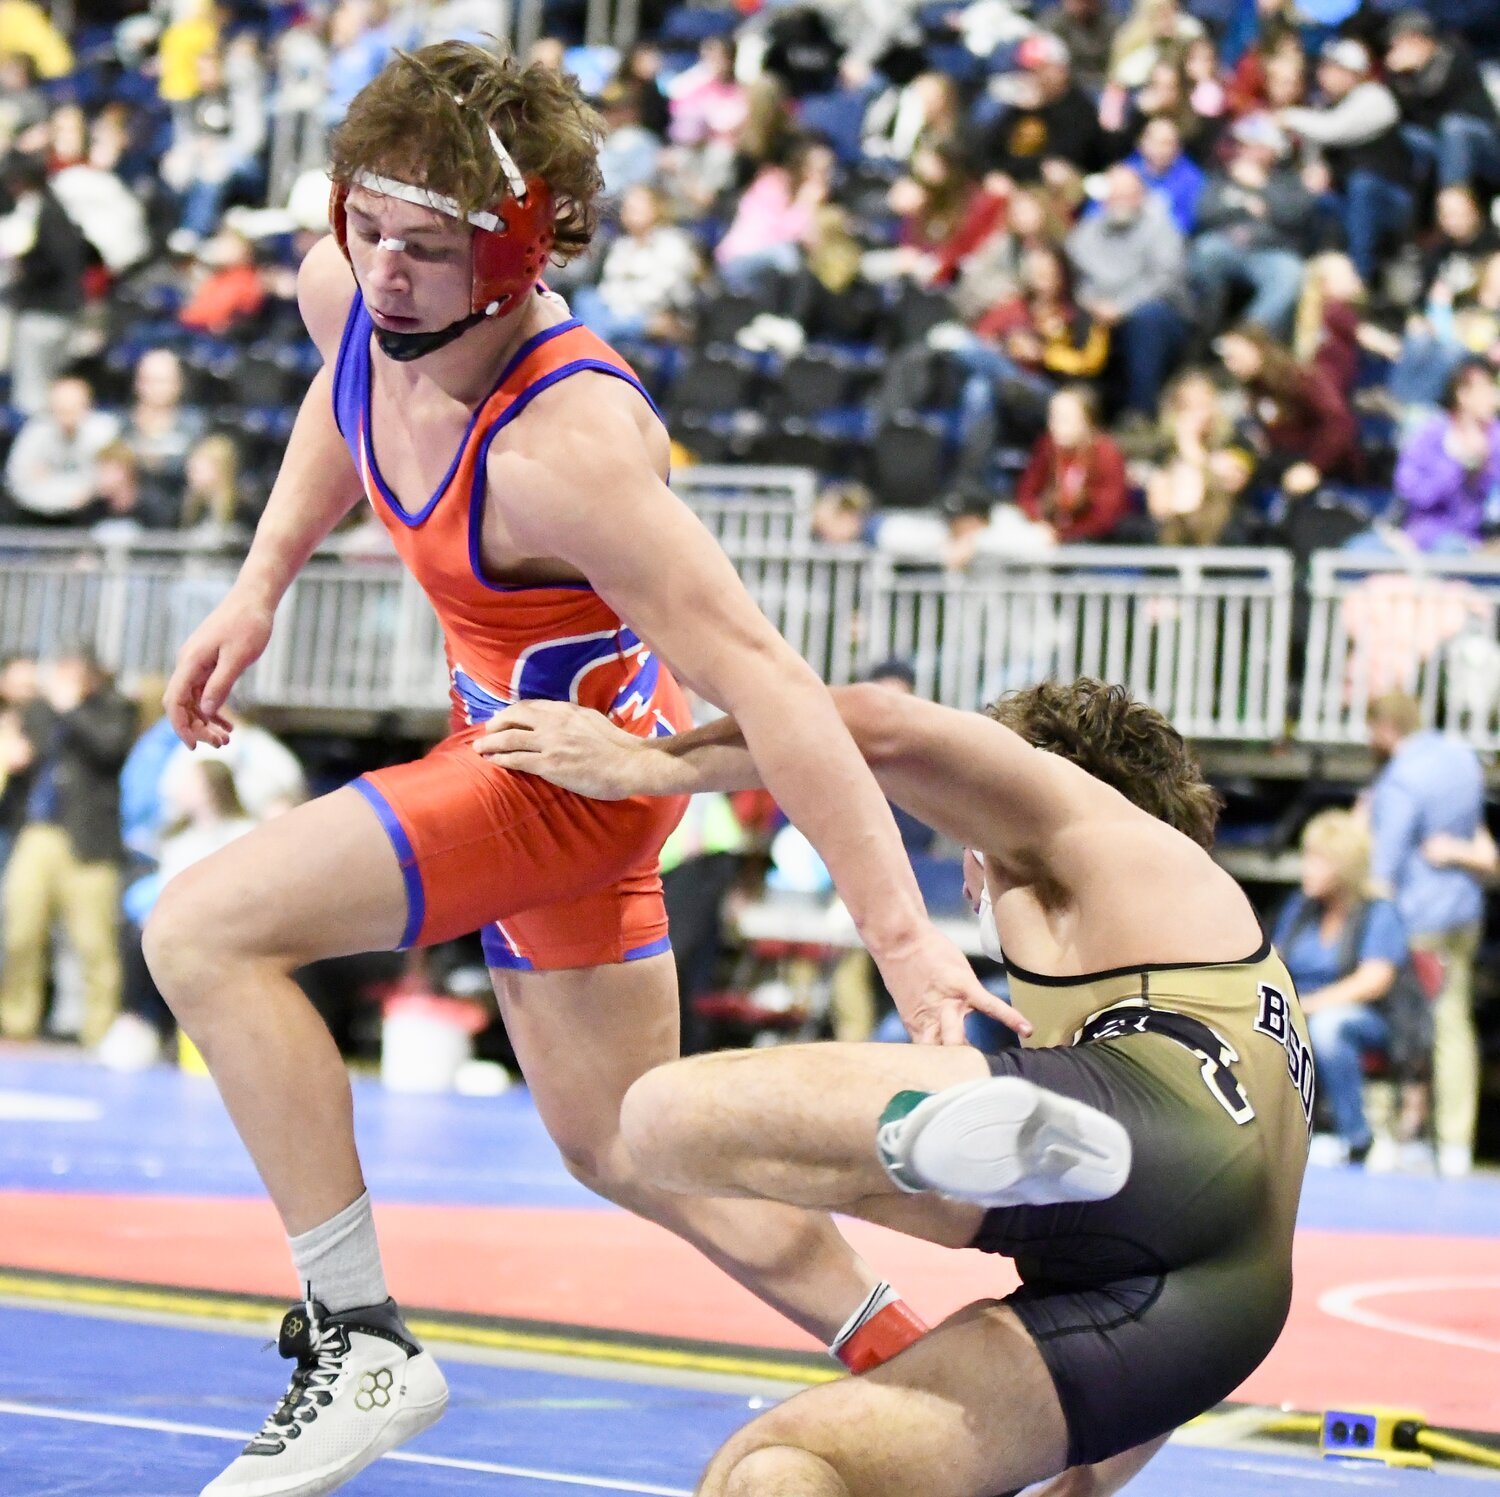 Red Devil wrestler Brady Roberts scores an escape point from Buffalo’s Hazen Camino during the 175-pound championship match at the 3A State Wrestling Championships in Casper. Roberts won the State Championship with a 3-0 decision.